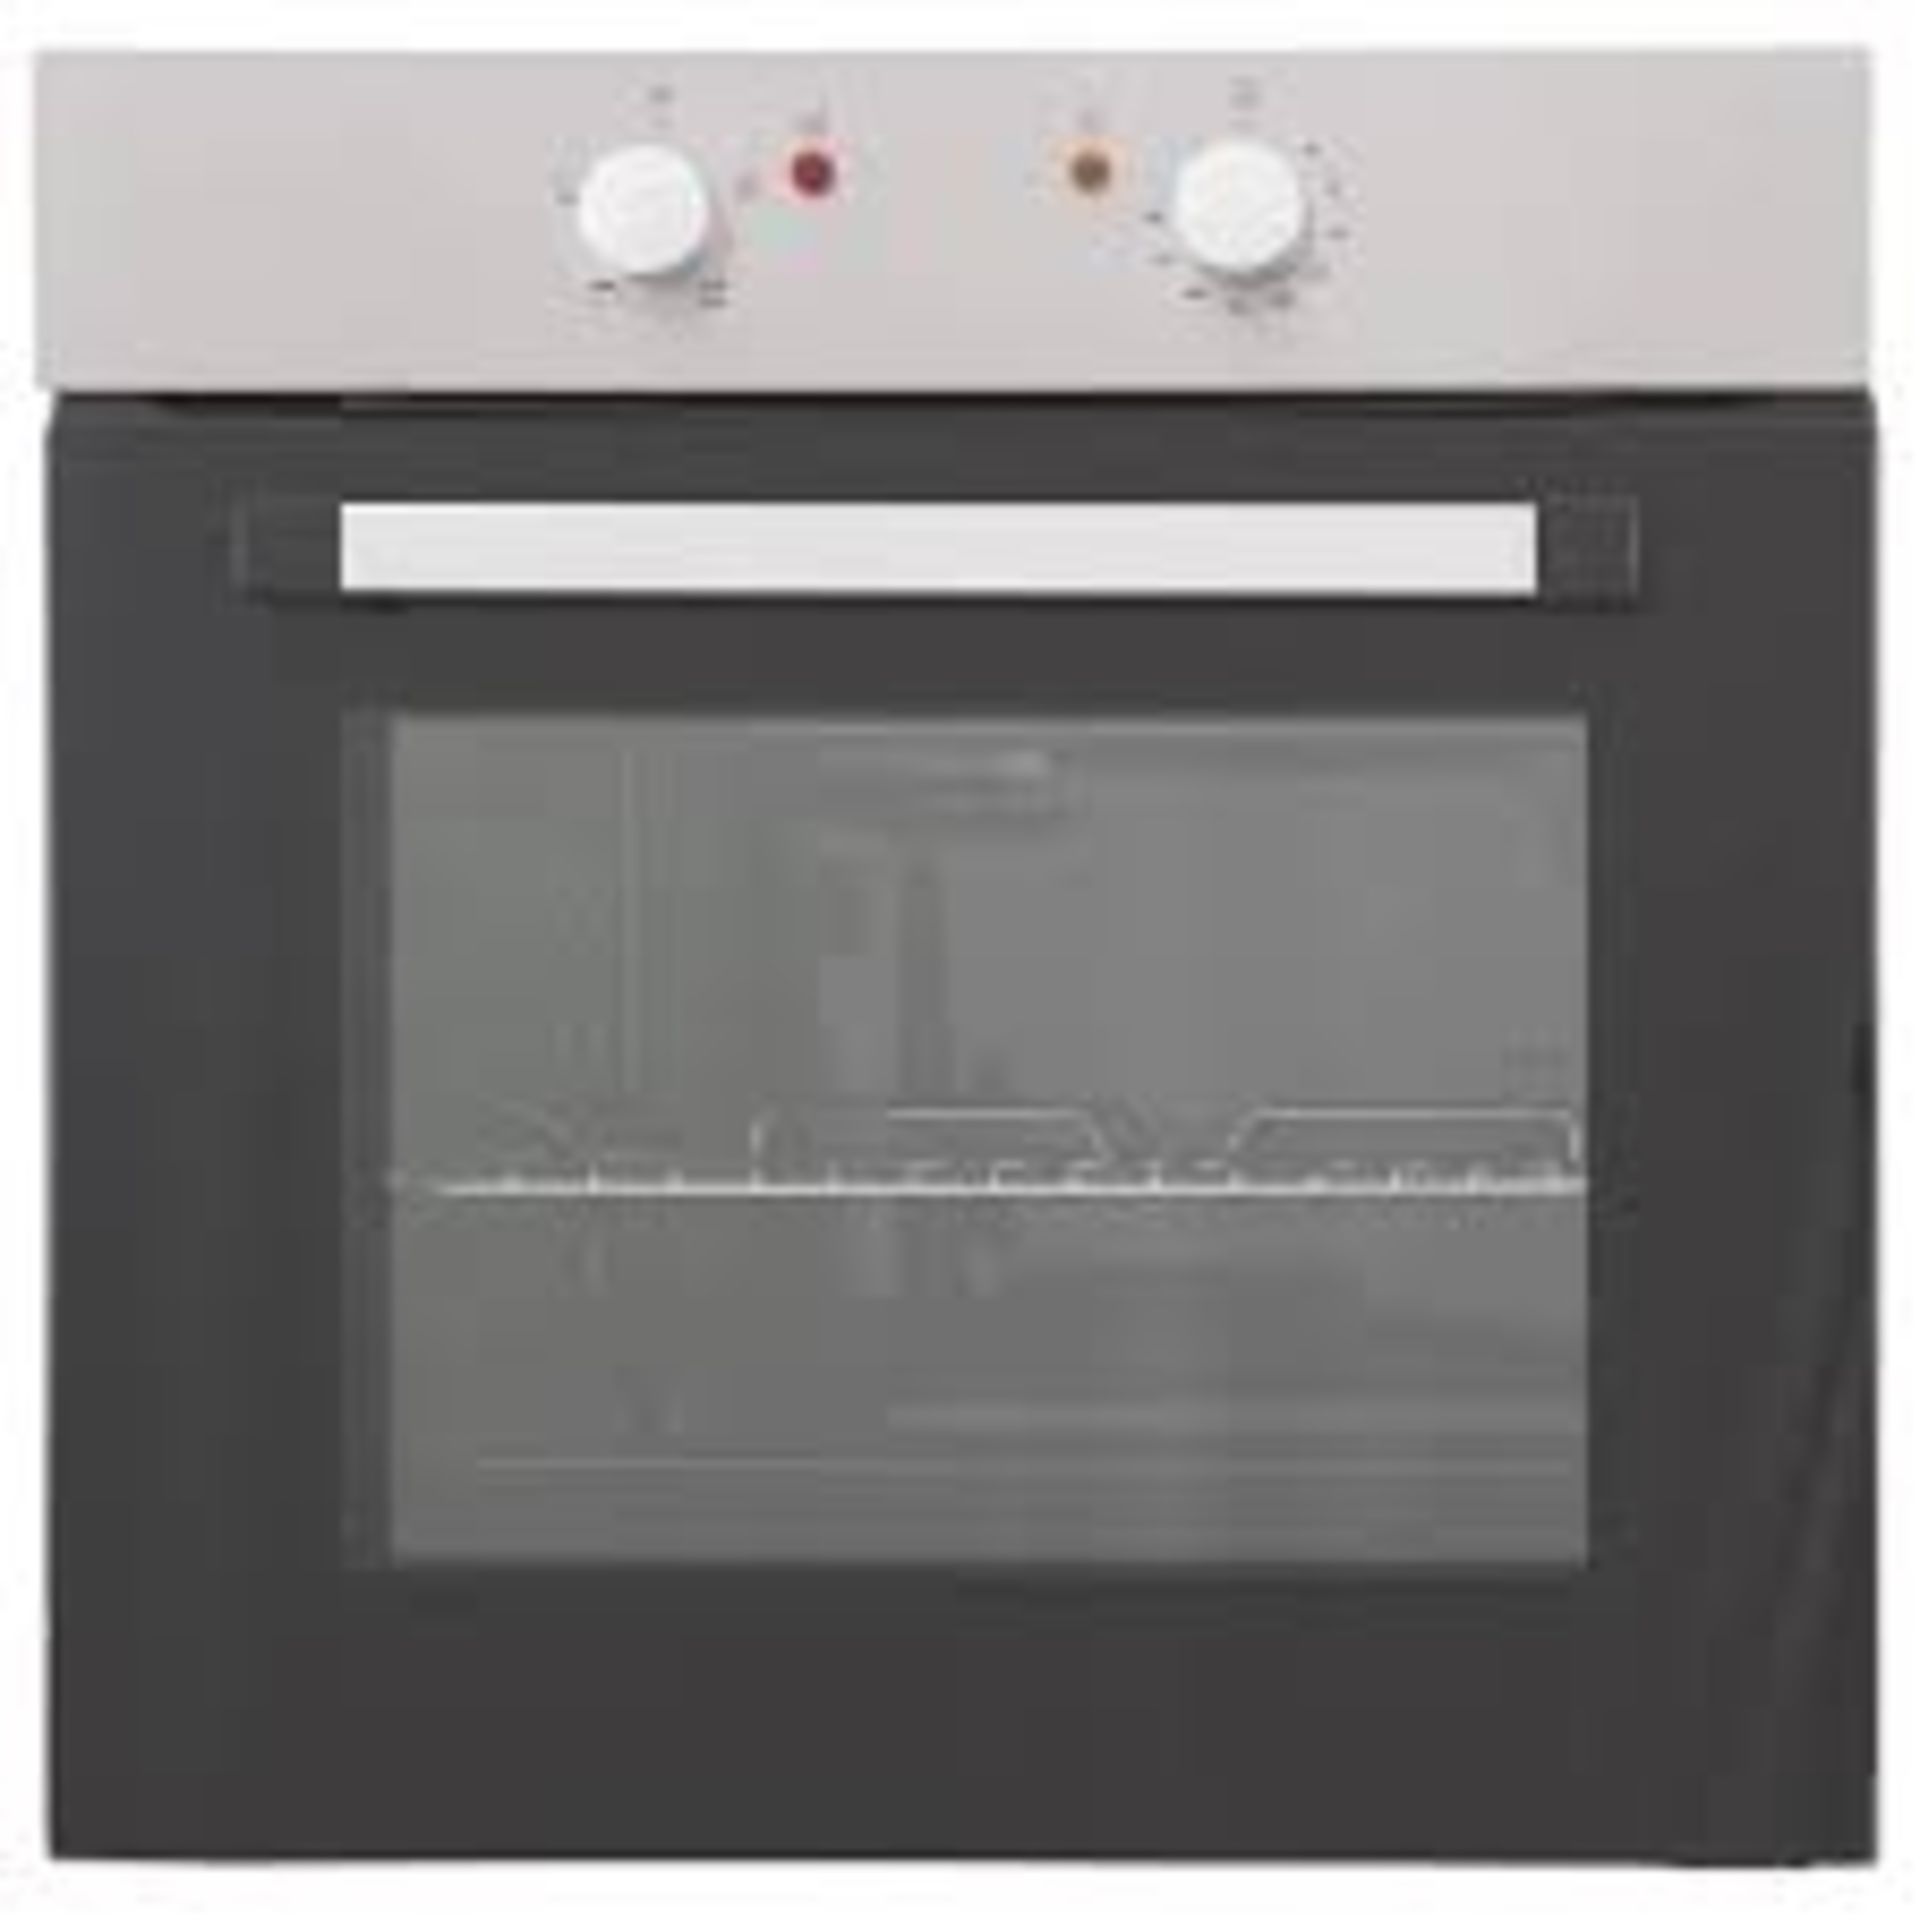 Cooke & Lewis Built- In Single Electric Oven Stainless Steel. - ER47.